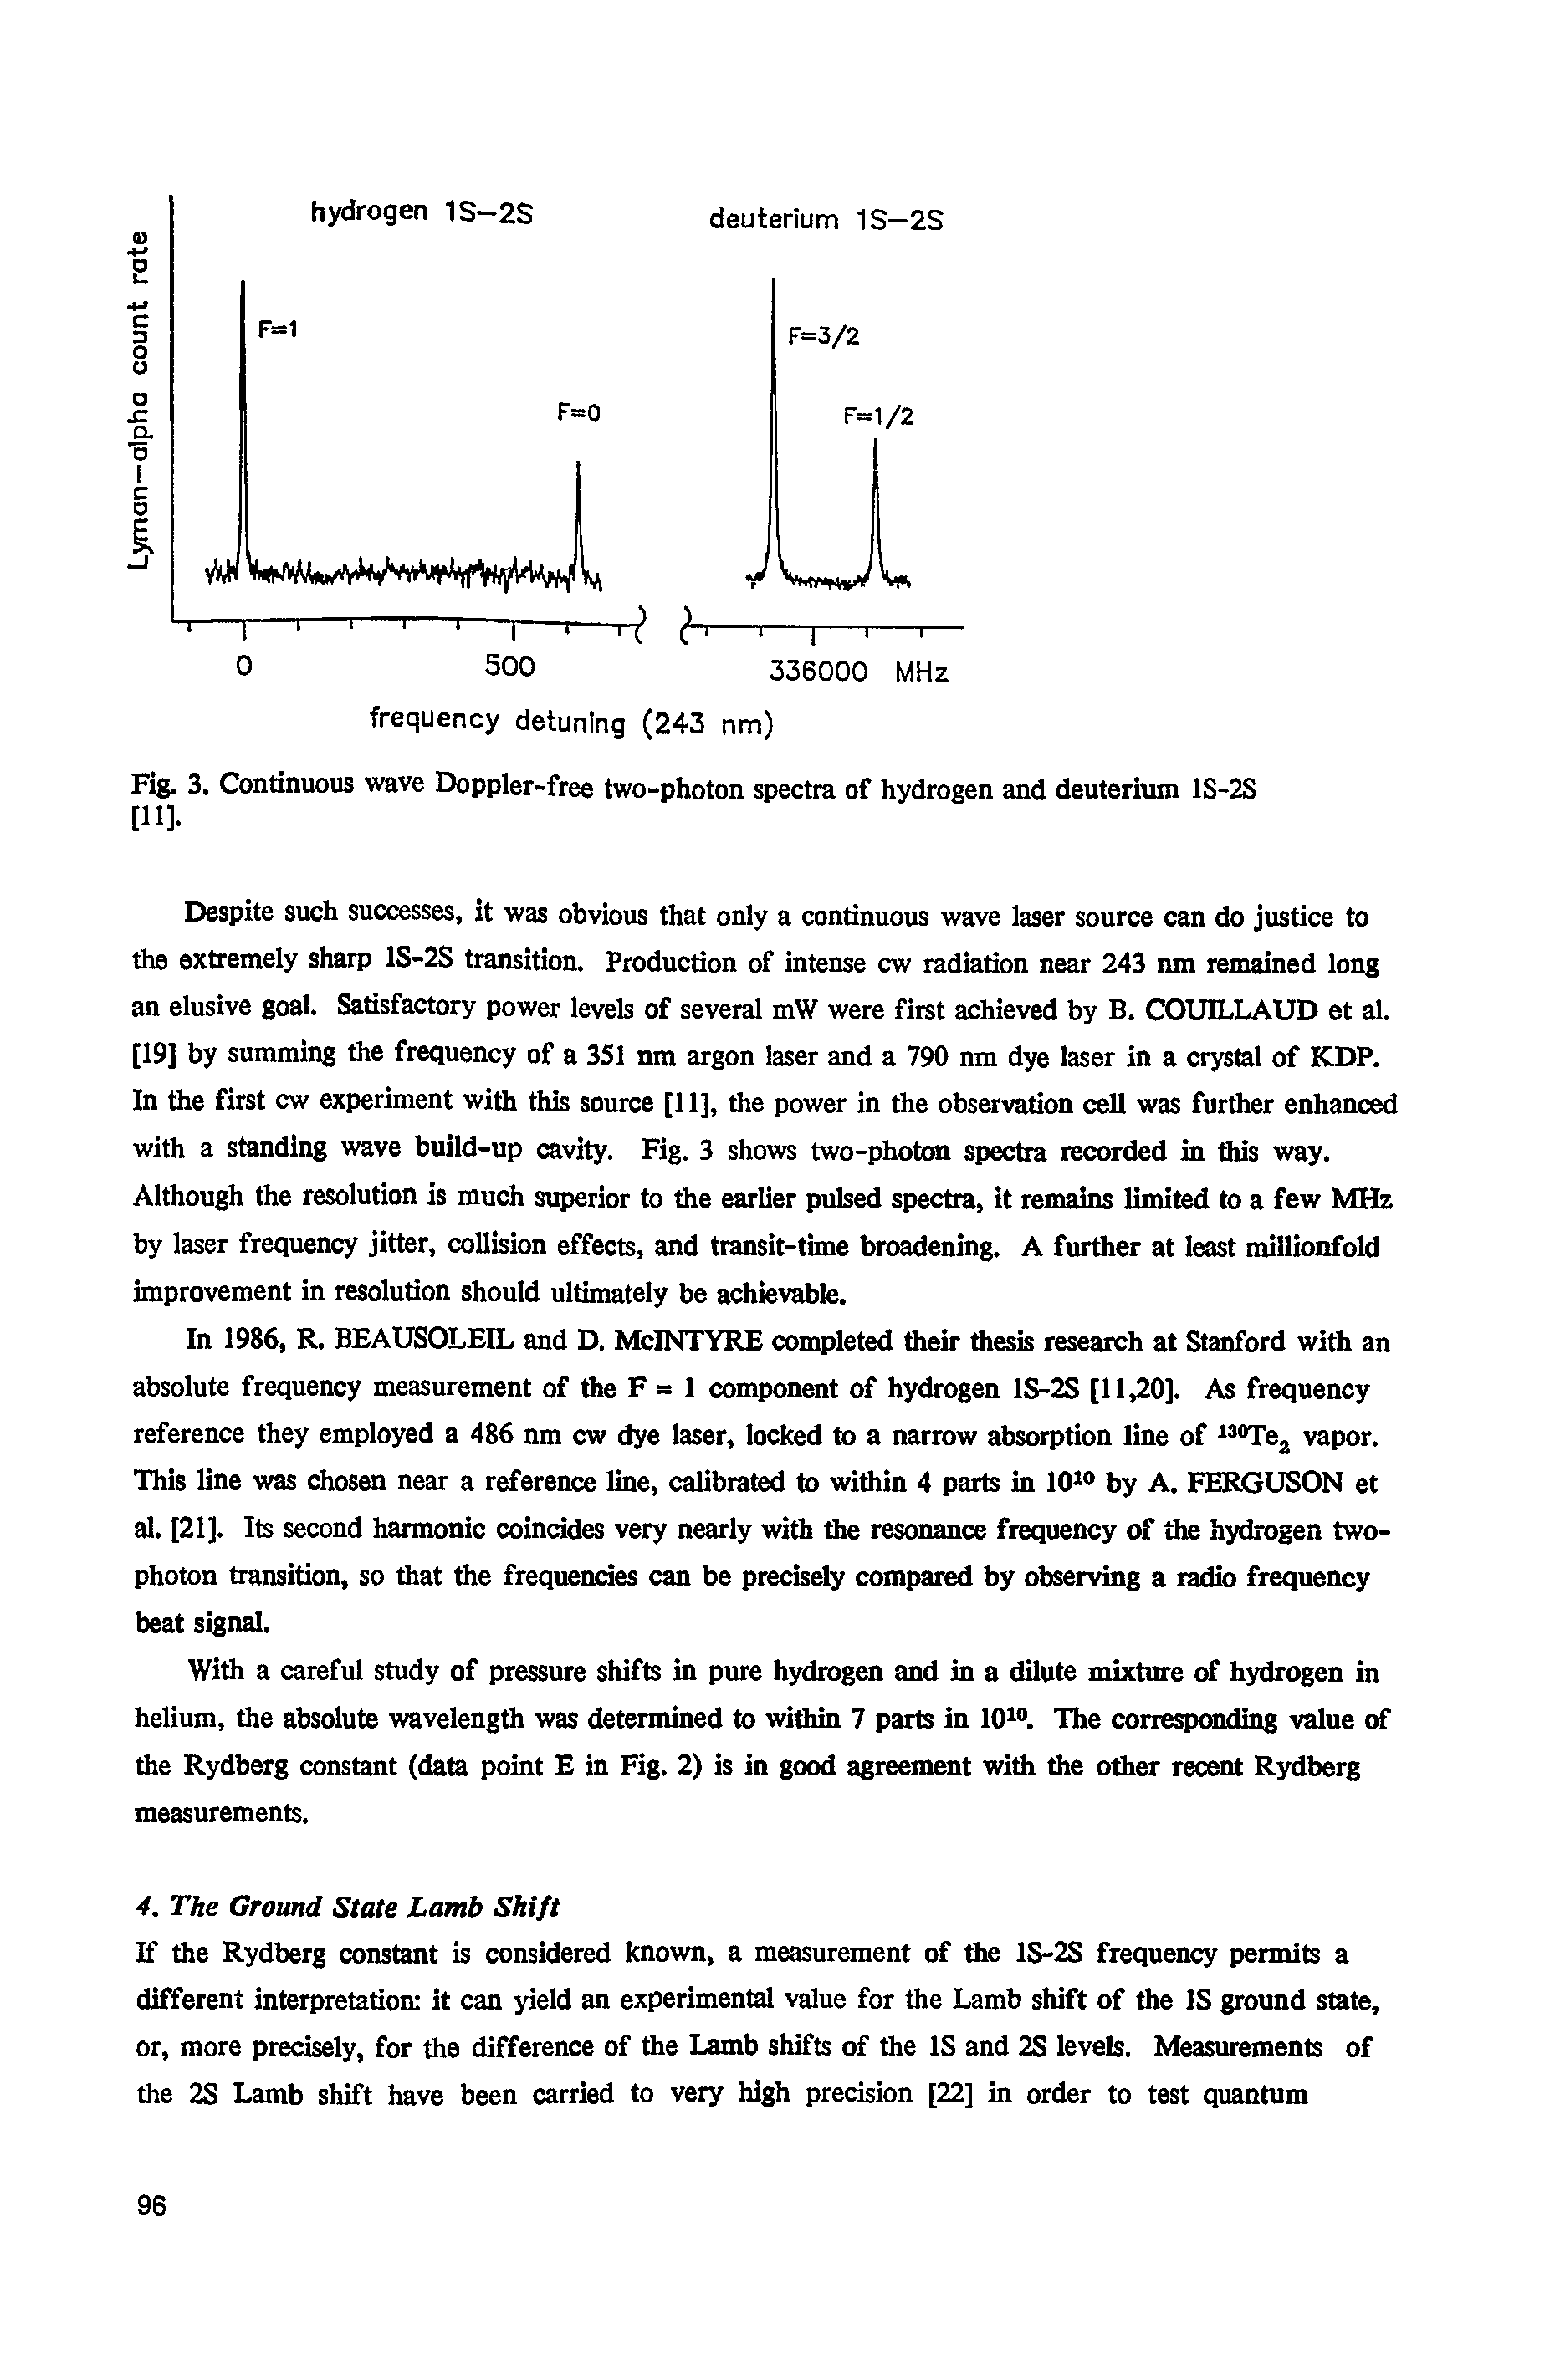 Fig. 3. Continuous wave Doppler-free two-photon spectra of hydrogen and deuterium 1S-2S [11].